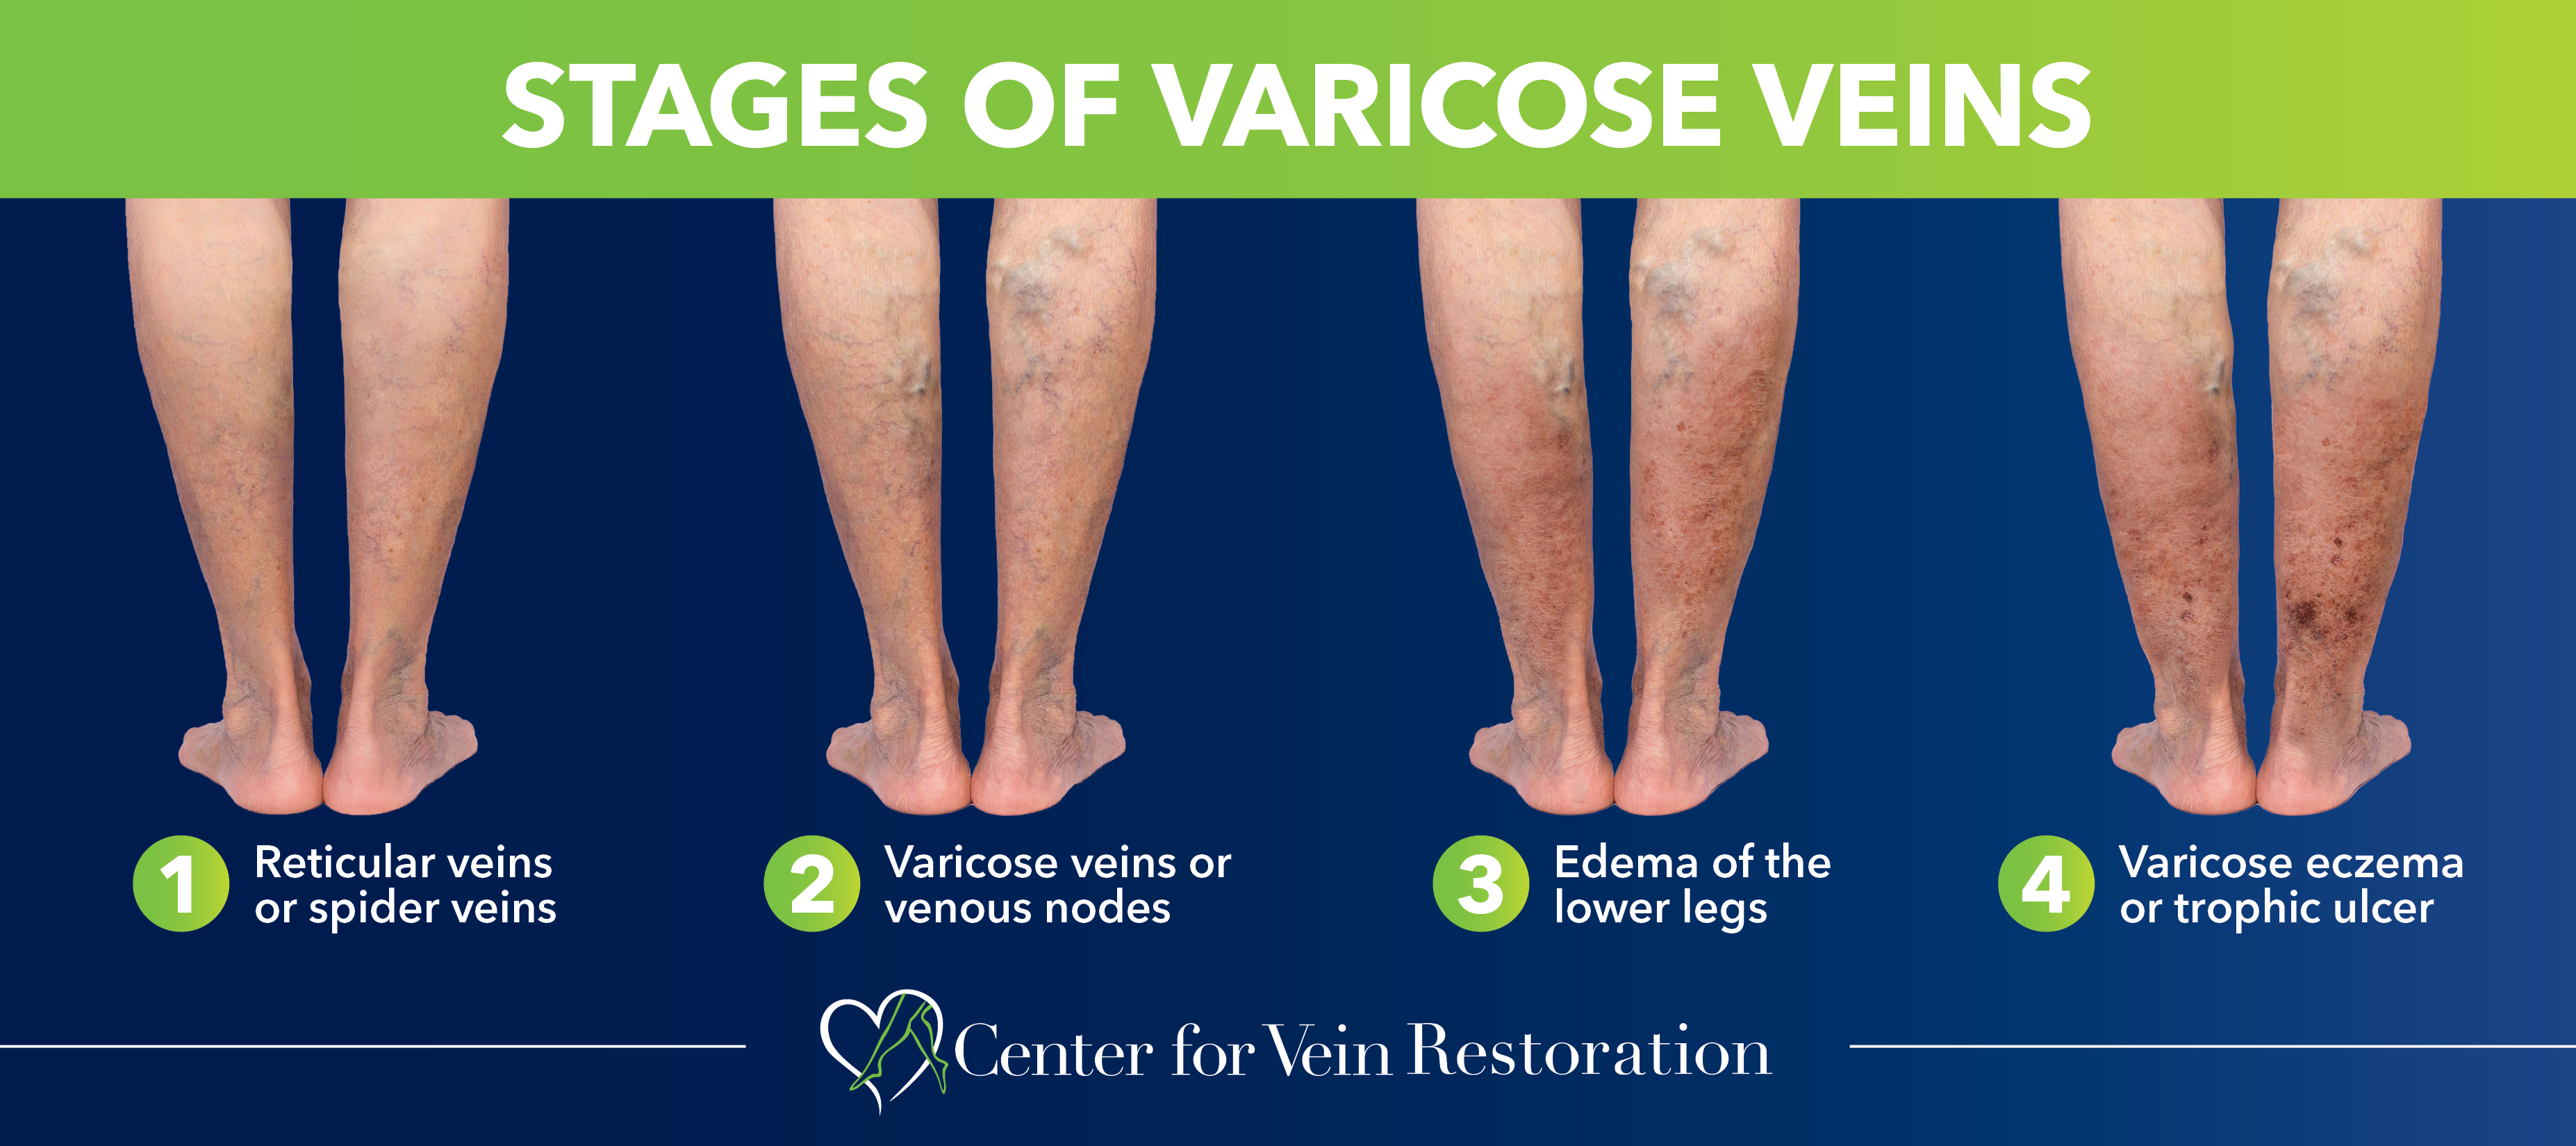 Is Varicose Vein Treatment Painful?: Center for Varicose Veins